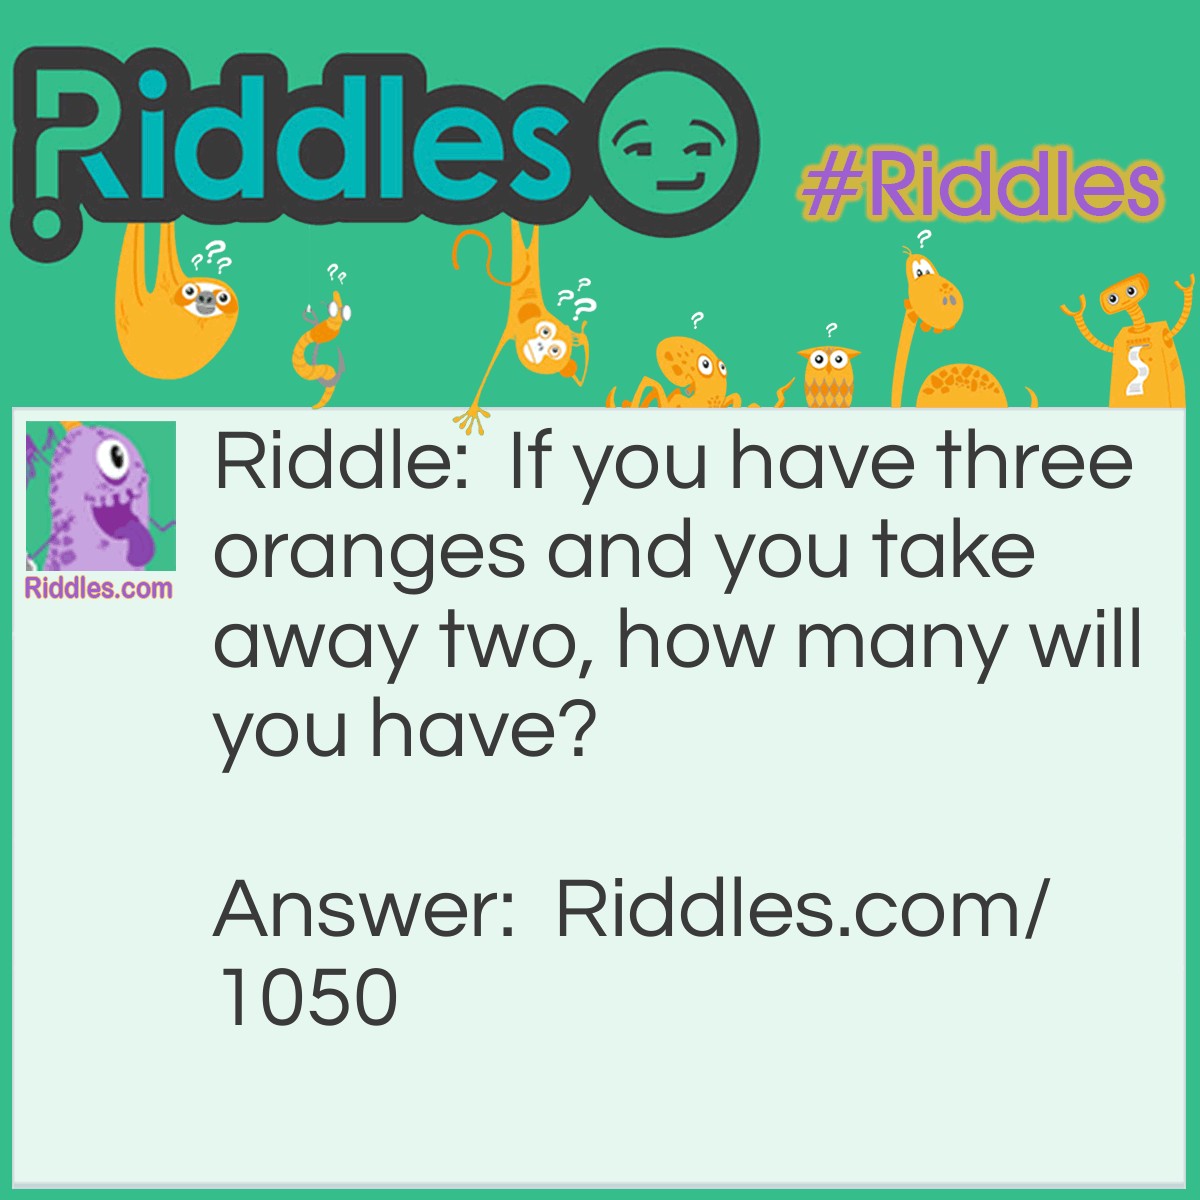 Riddle: If you have three oranges and you take away two, how many will you have? Answer: the answer is 2 two you take 2.... (you have 2)